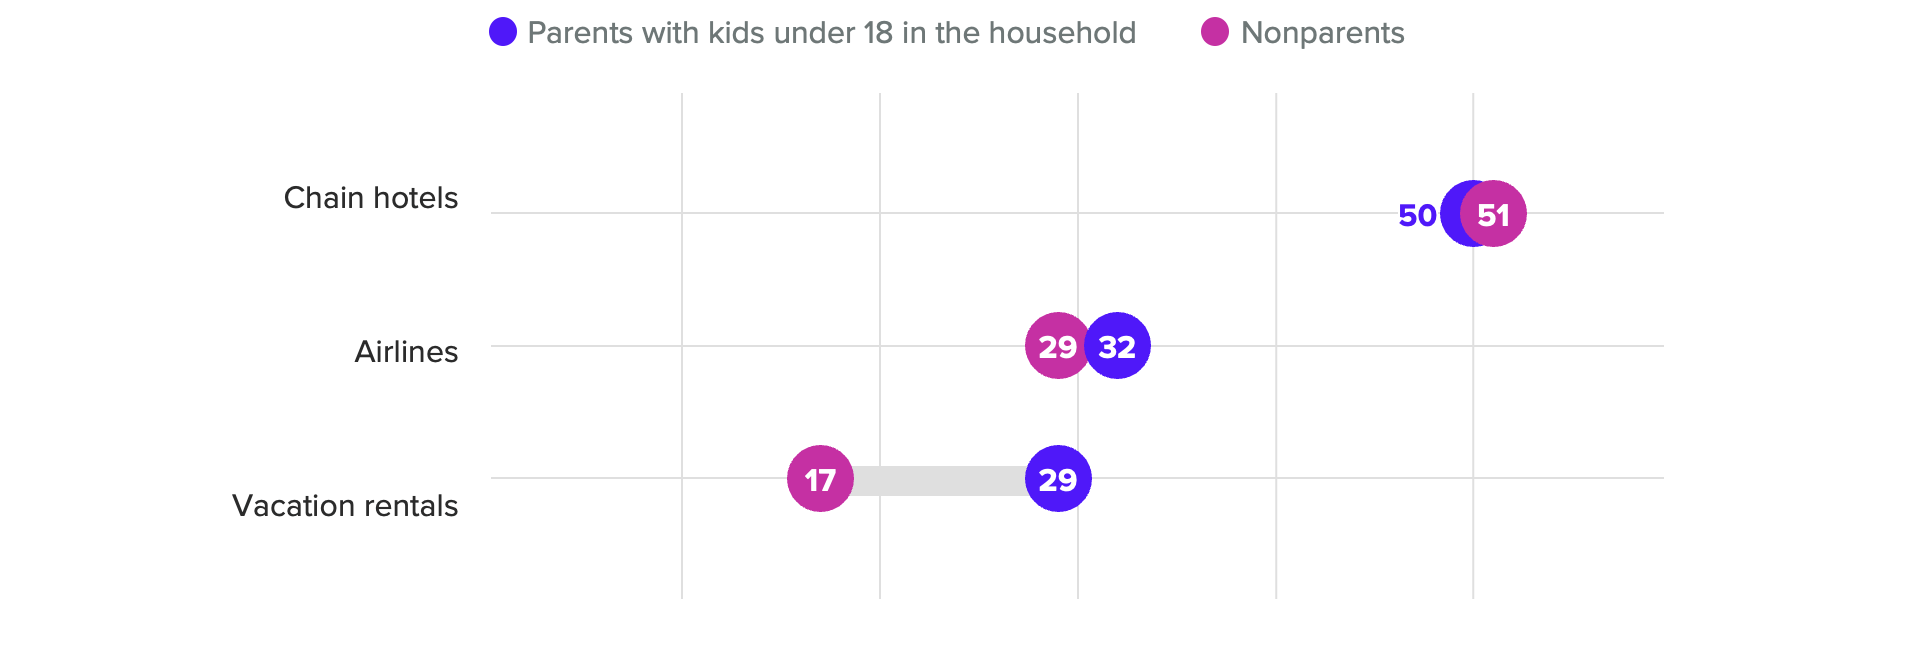 Dumbbell chart of net favorability of brand sectors among parents and nonparents, showing vacation rentals appeal much more to parents than they do to nonparents.